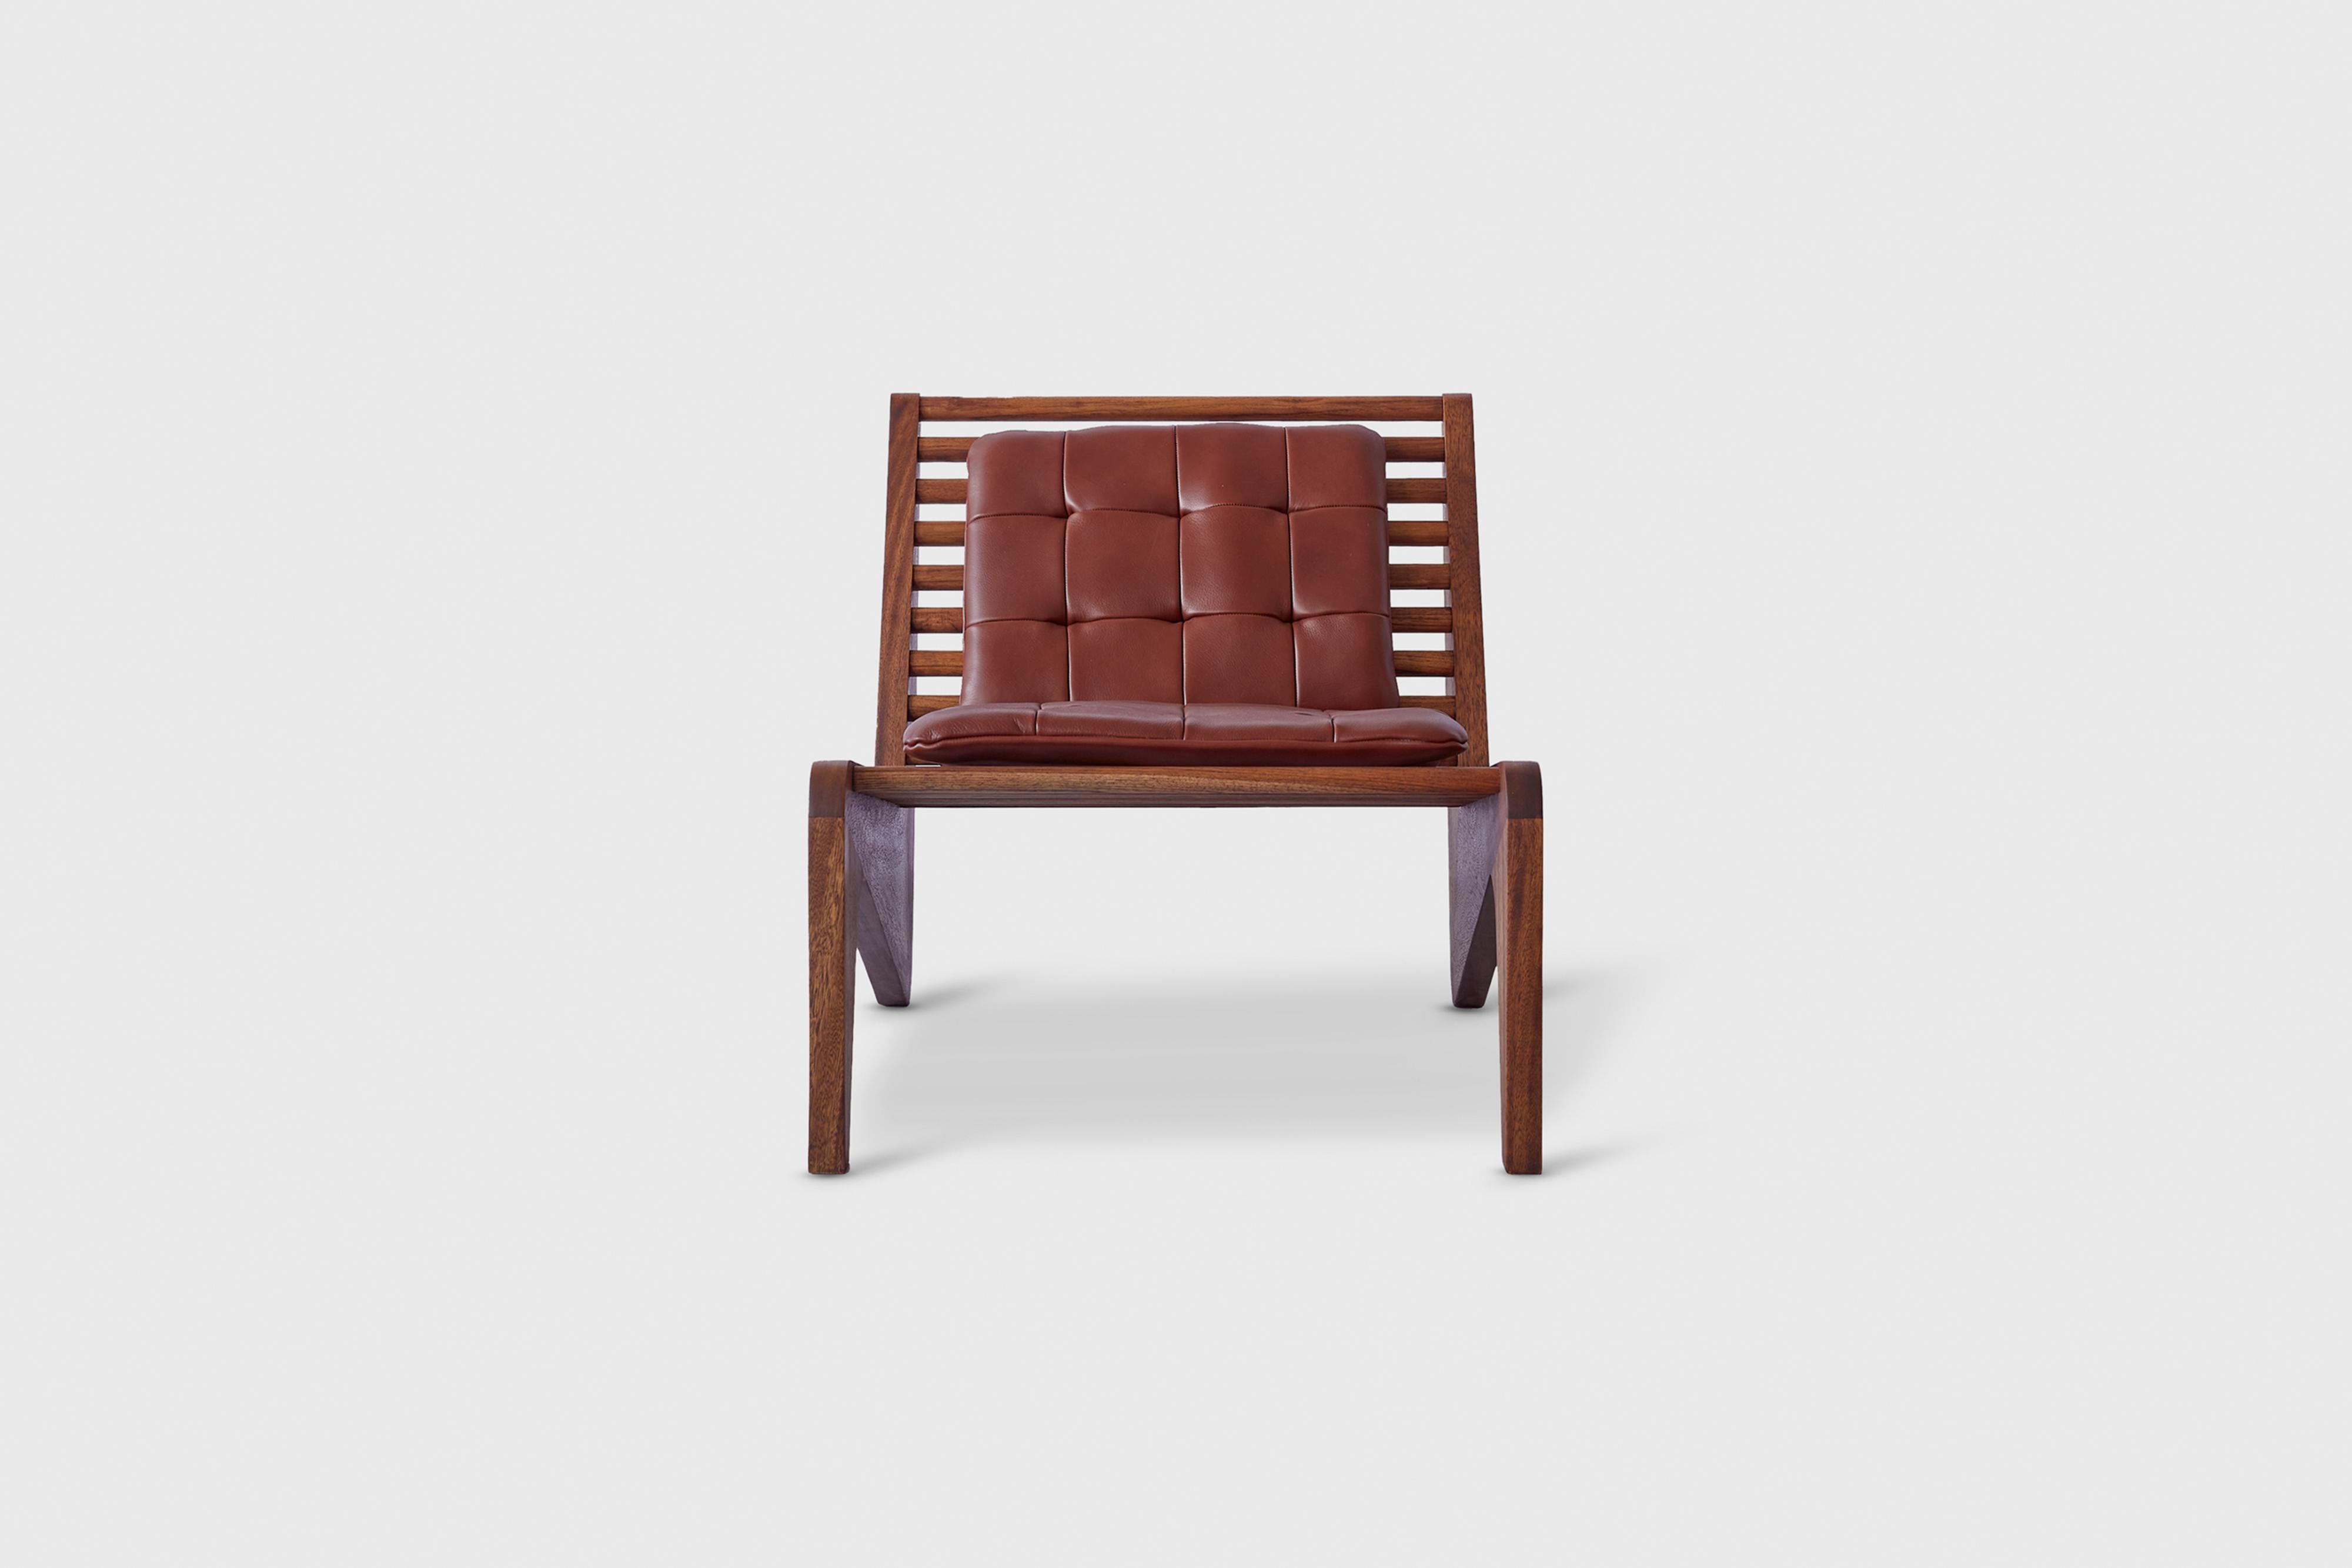 Brown Ala lounge chair by Atra Design
Dimensions: D 50 x W 46.9 x H 76.9 cm
Materials: leather pads, mahogany
Available in mahogany or teak. Available in other color.

Atra Design
We are Atra, a furniture brand produced by Atra form a mexico